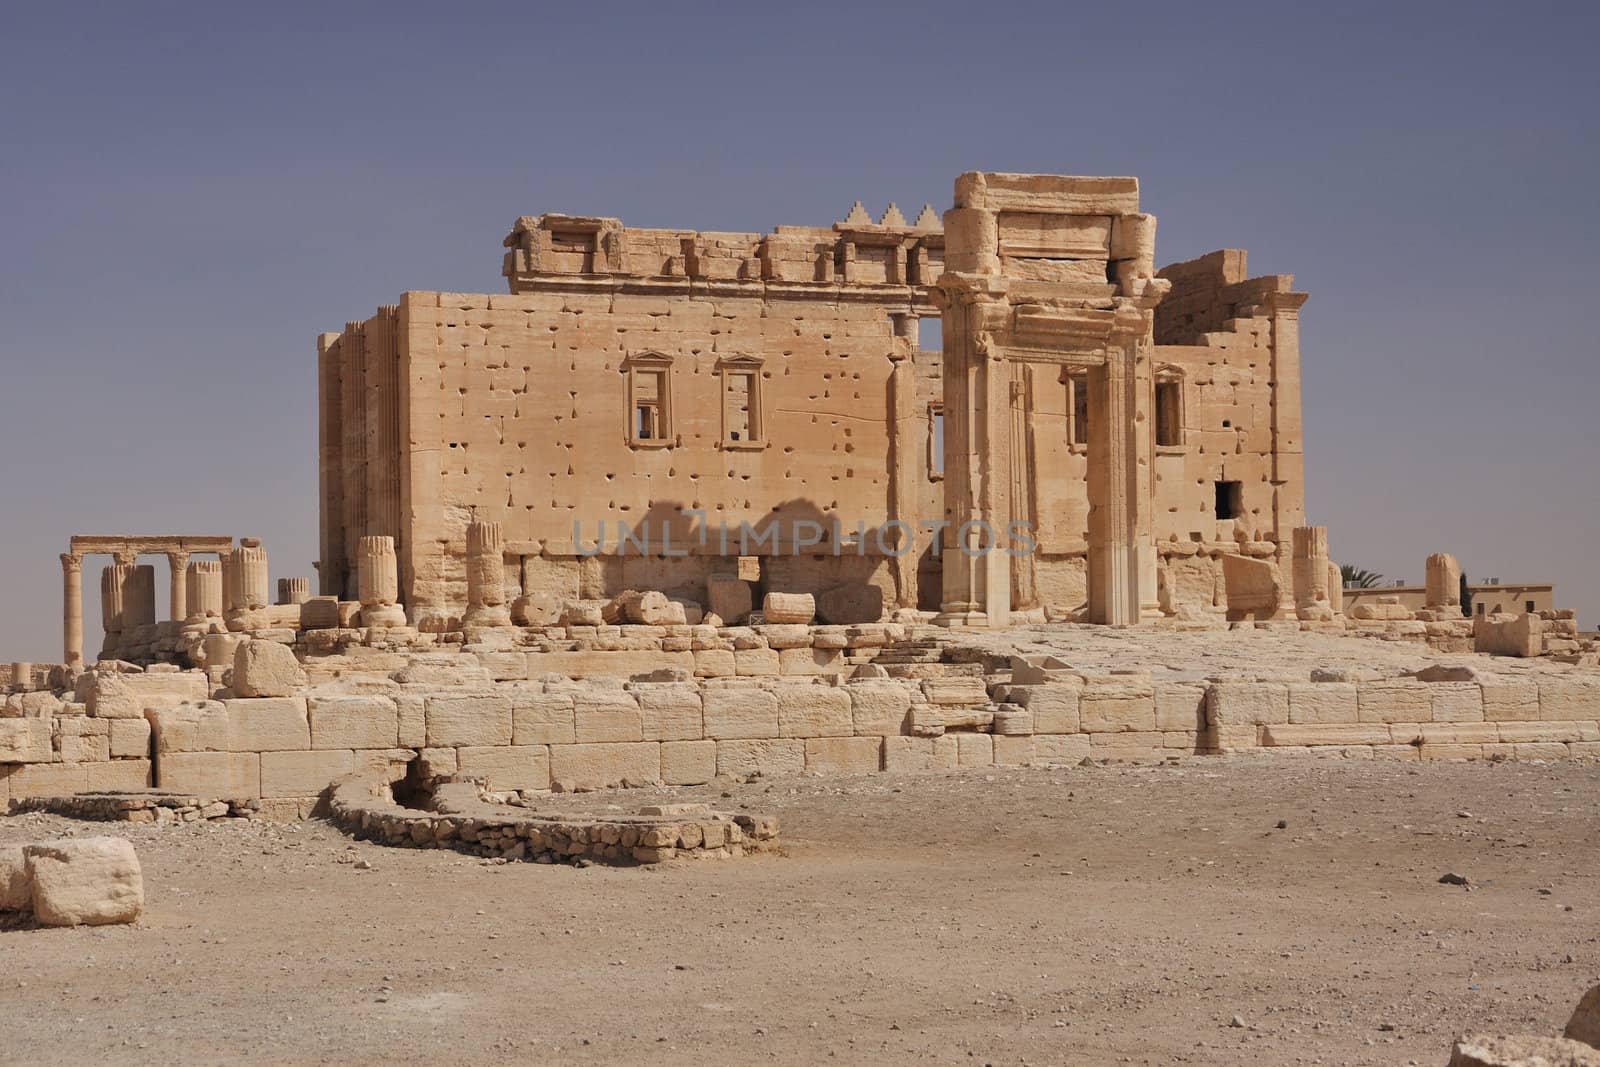 Built in honour of a Semitic god, the Temple of Bel is Palmyra�s main temple.It is located in the south eastern corner of the city, where a temple has occupied the spot from the beginning of Palmyra�s history.